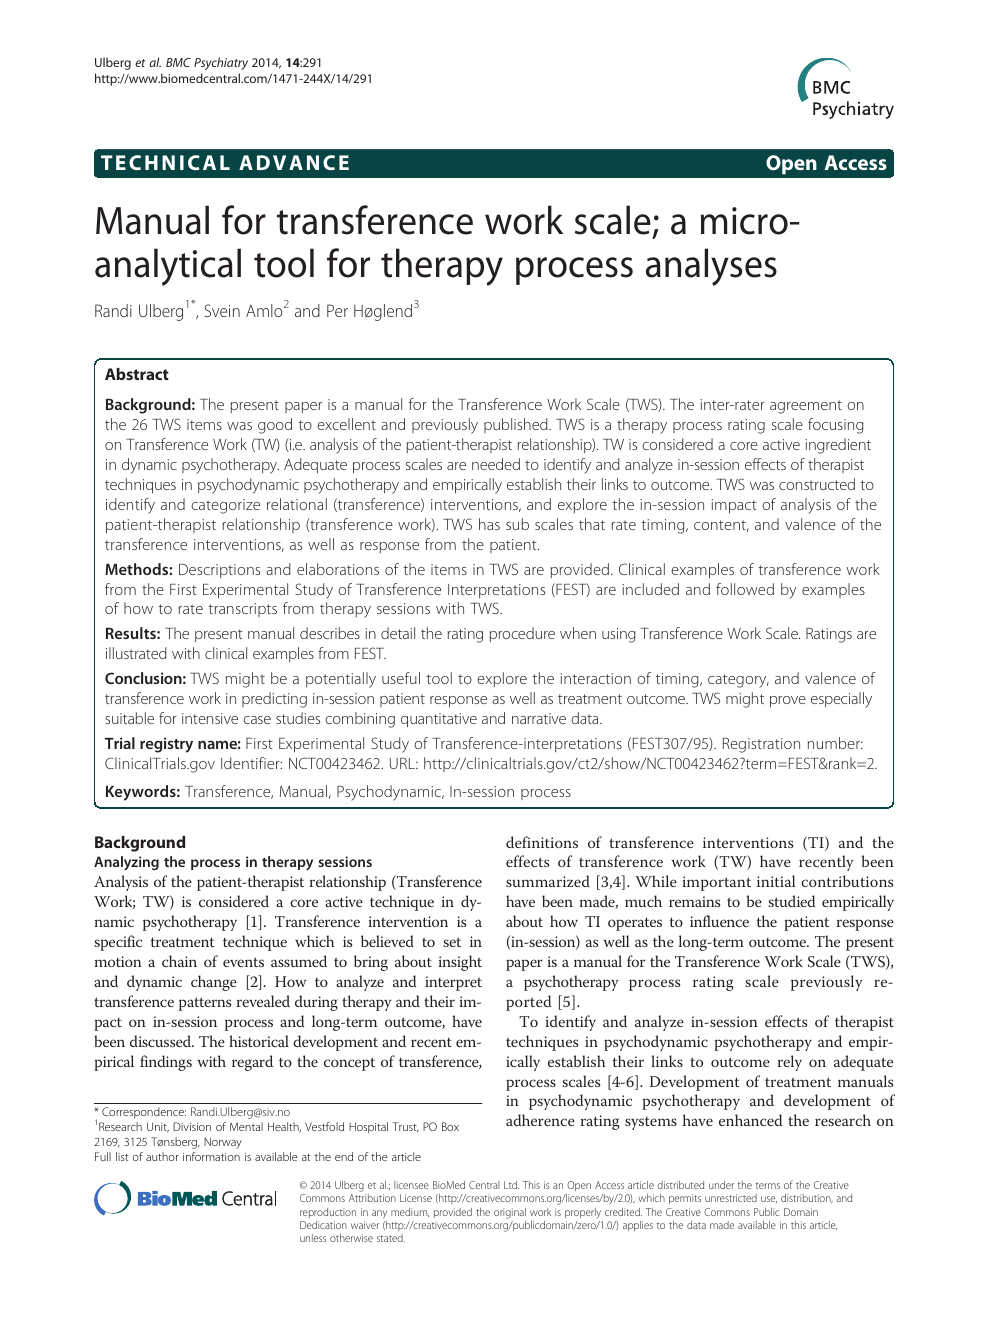 Manual For Transference Work Scale A Micro Analytical Tool For Therapy Process Analyses Topic Of Research Paper In Psychology Download Scholarly Article Pdf And Read For Free On Cyberleninka Open Science Hub